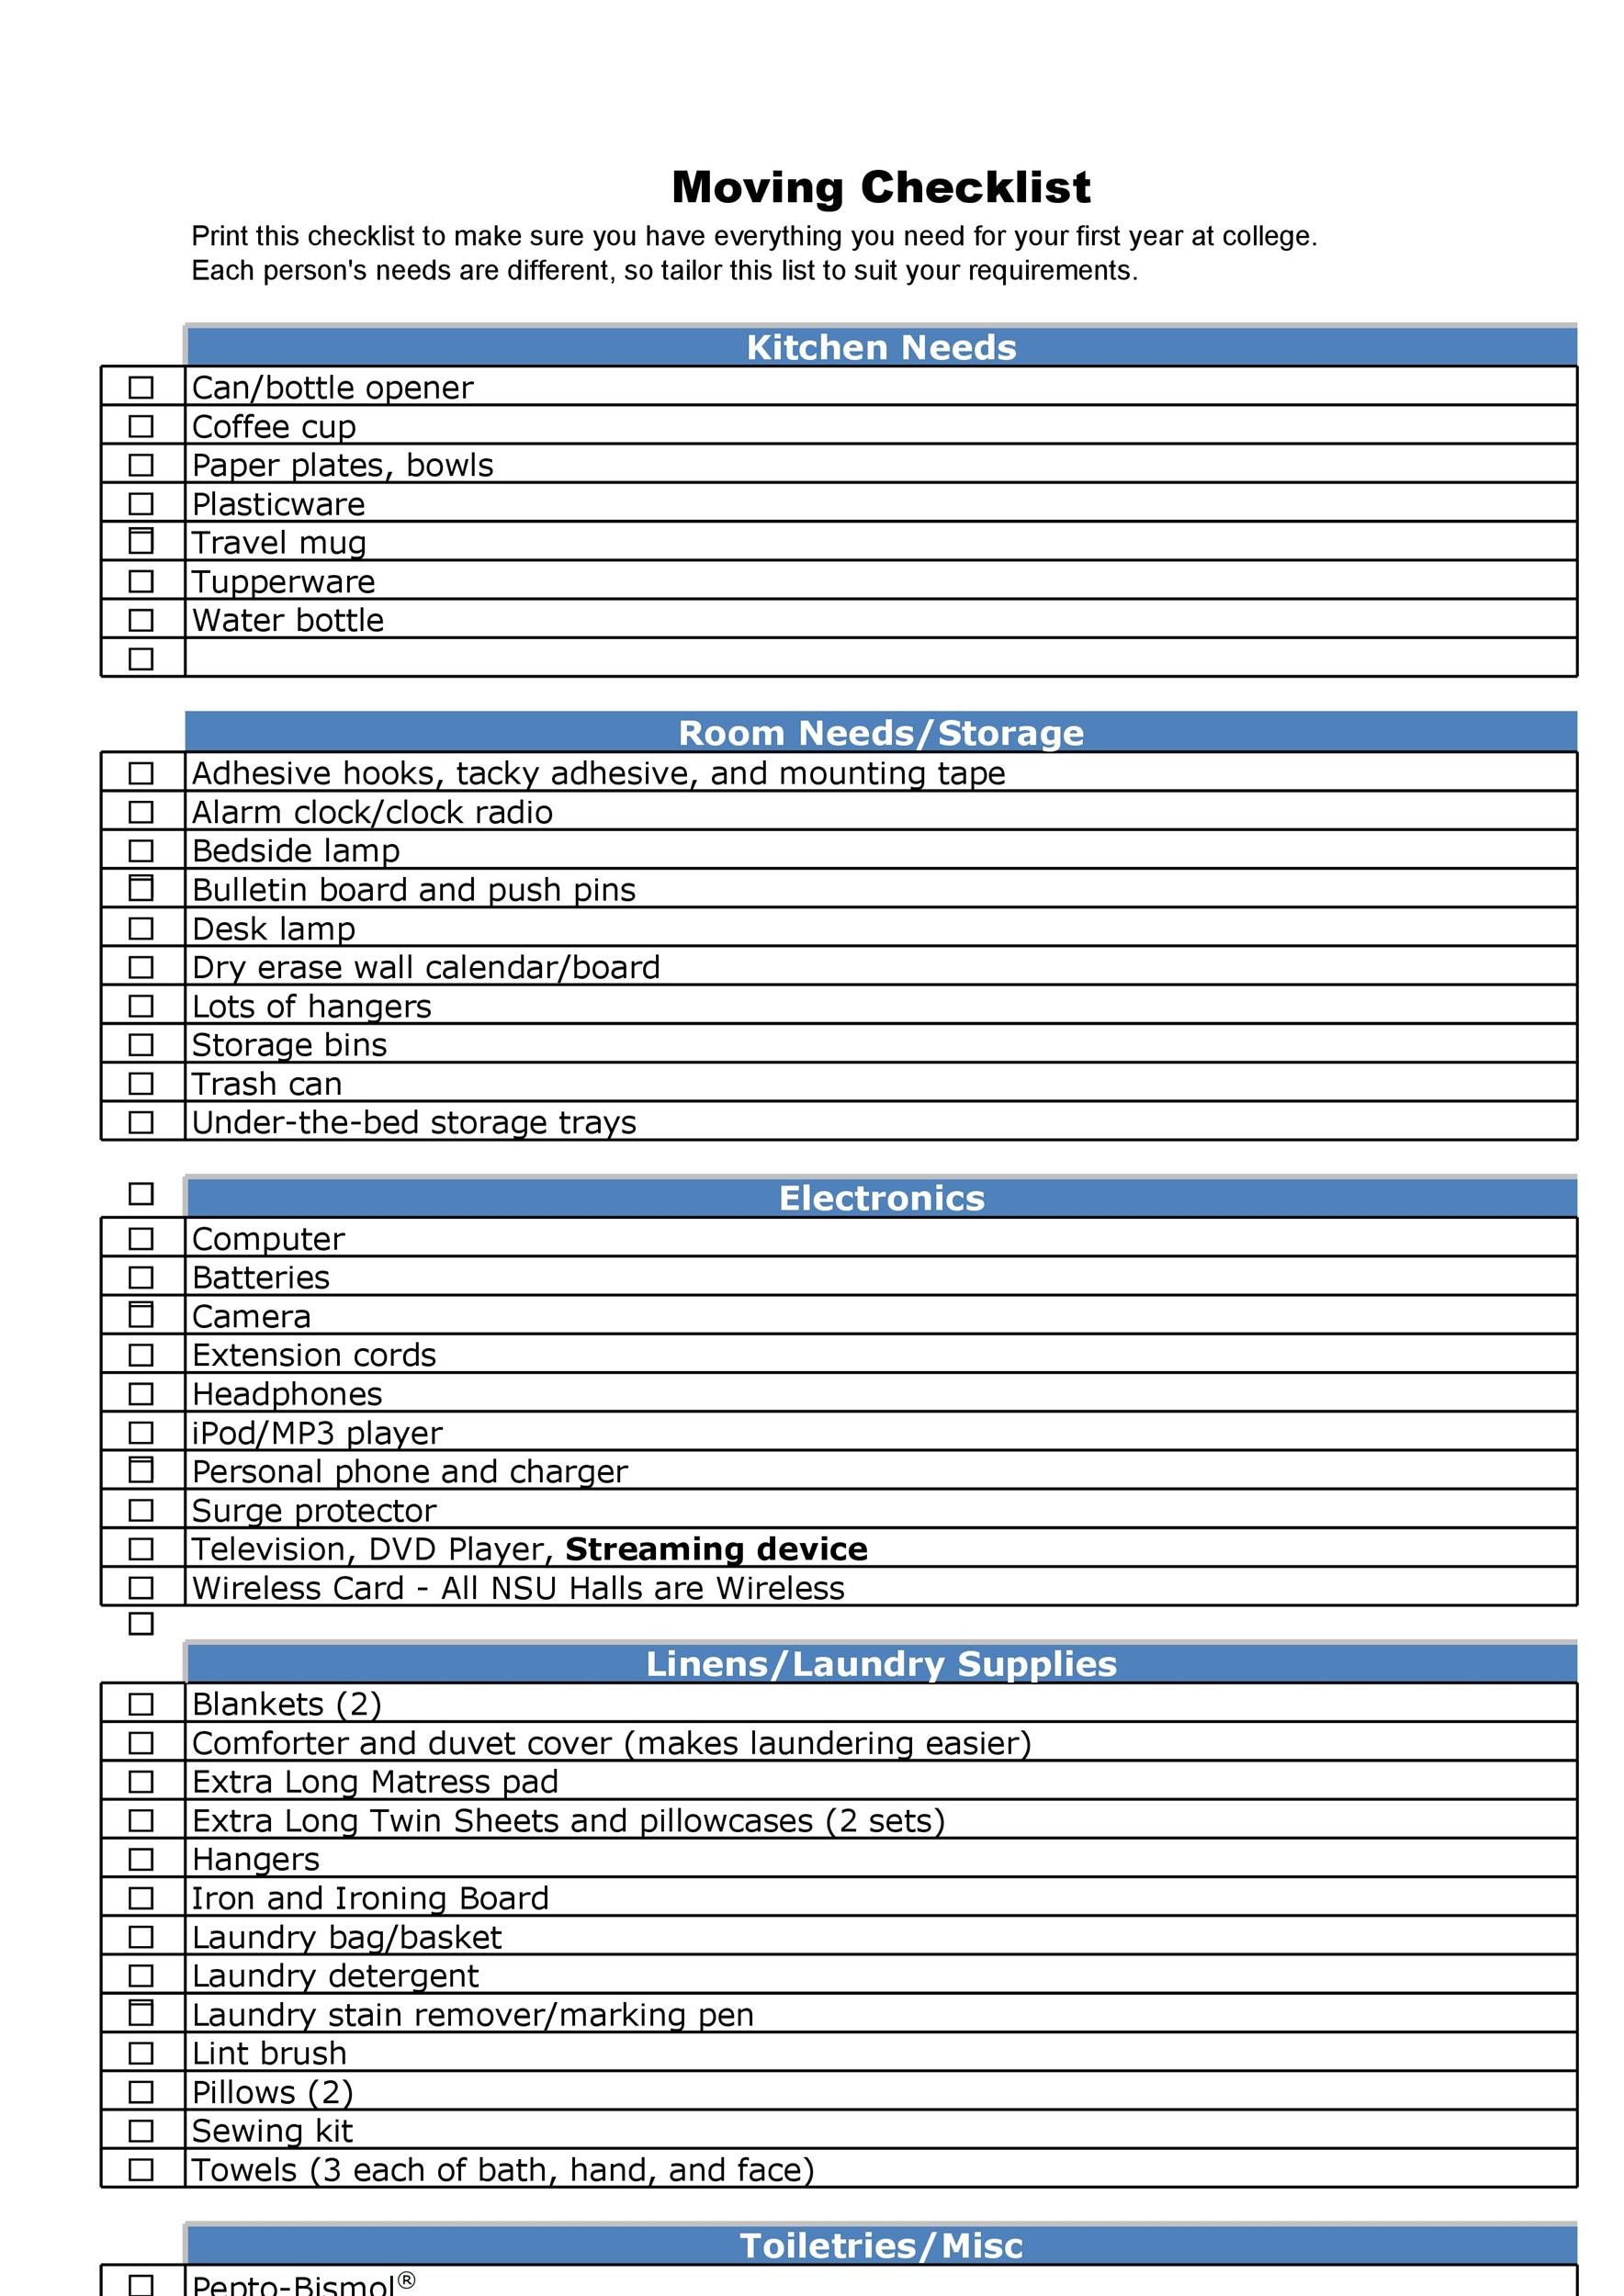 first-new-apartment-checklist-40-essential-templates-template-lab